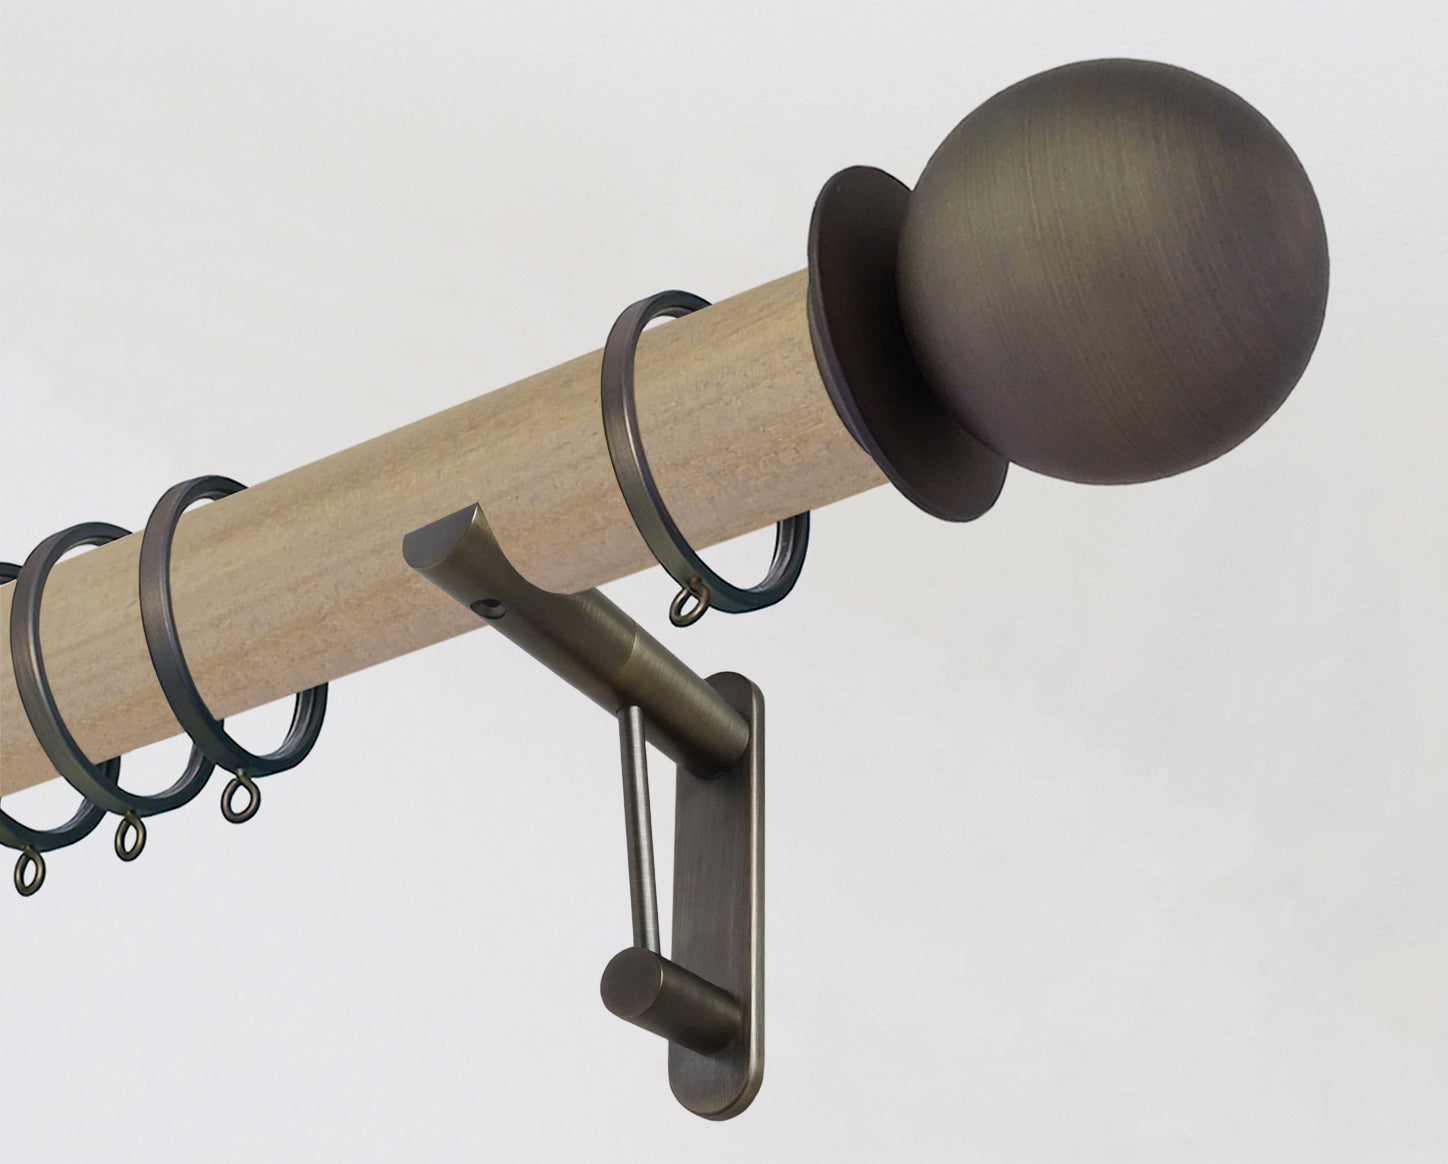 50mm dia. cotswold oak stained wood curtain pole with metal ball finials